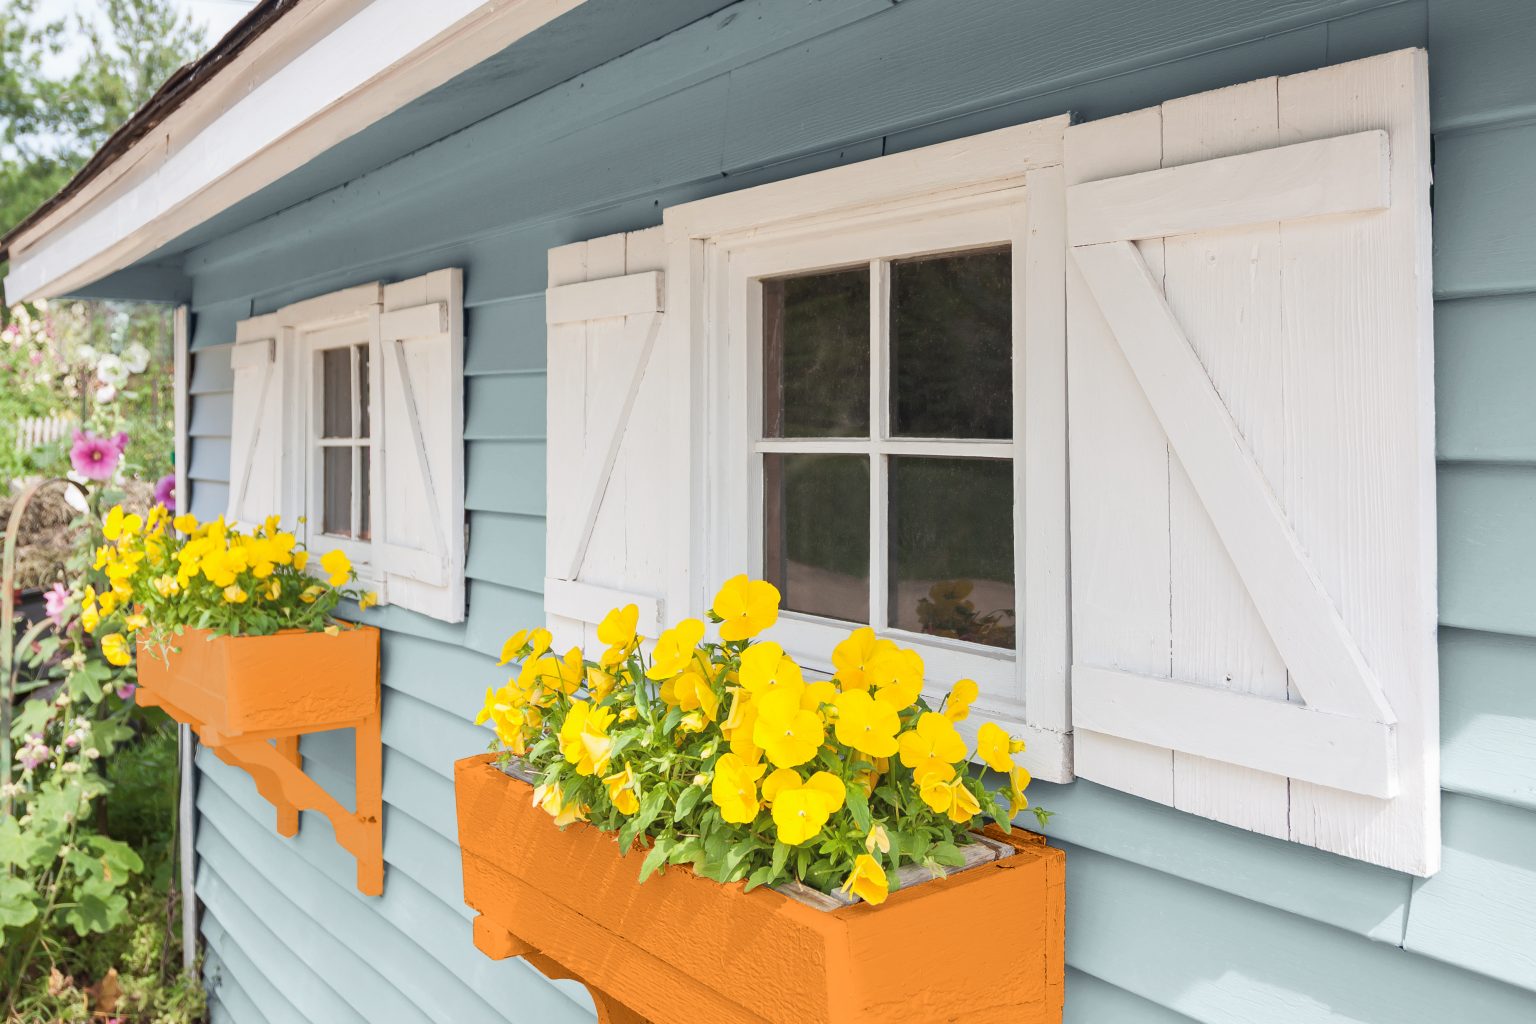 The exterior of a home with two planter boxes in the colour Joyful Orange filled with yellow flowers